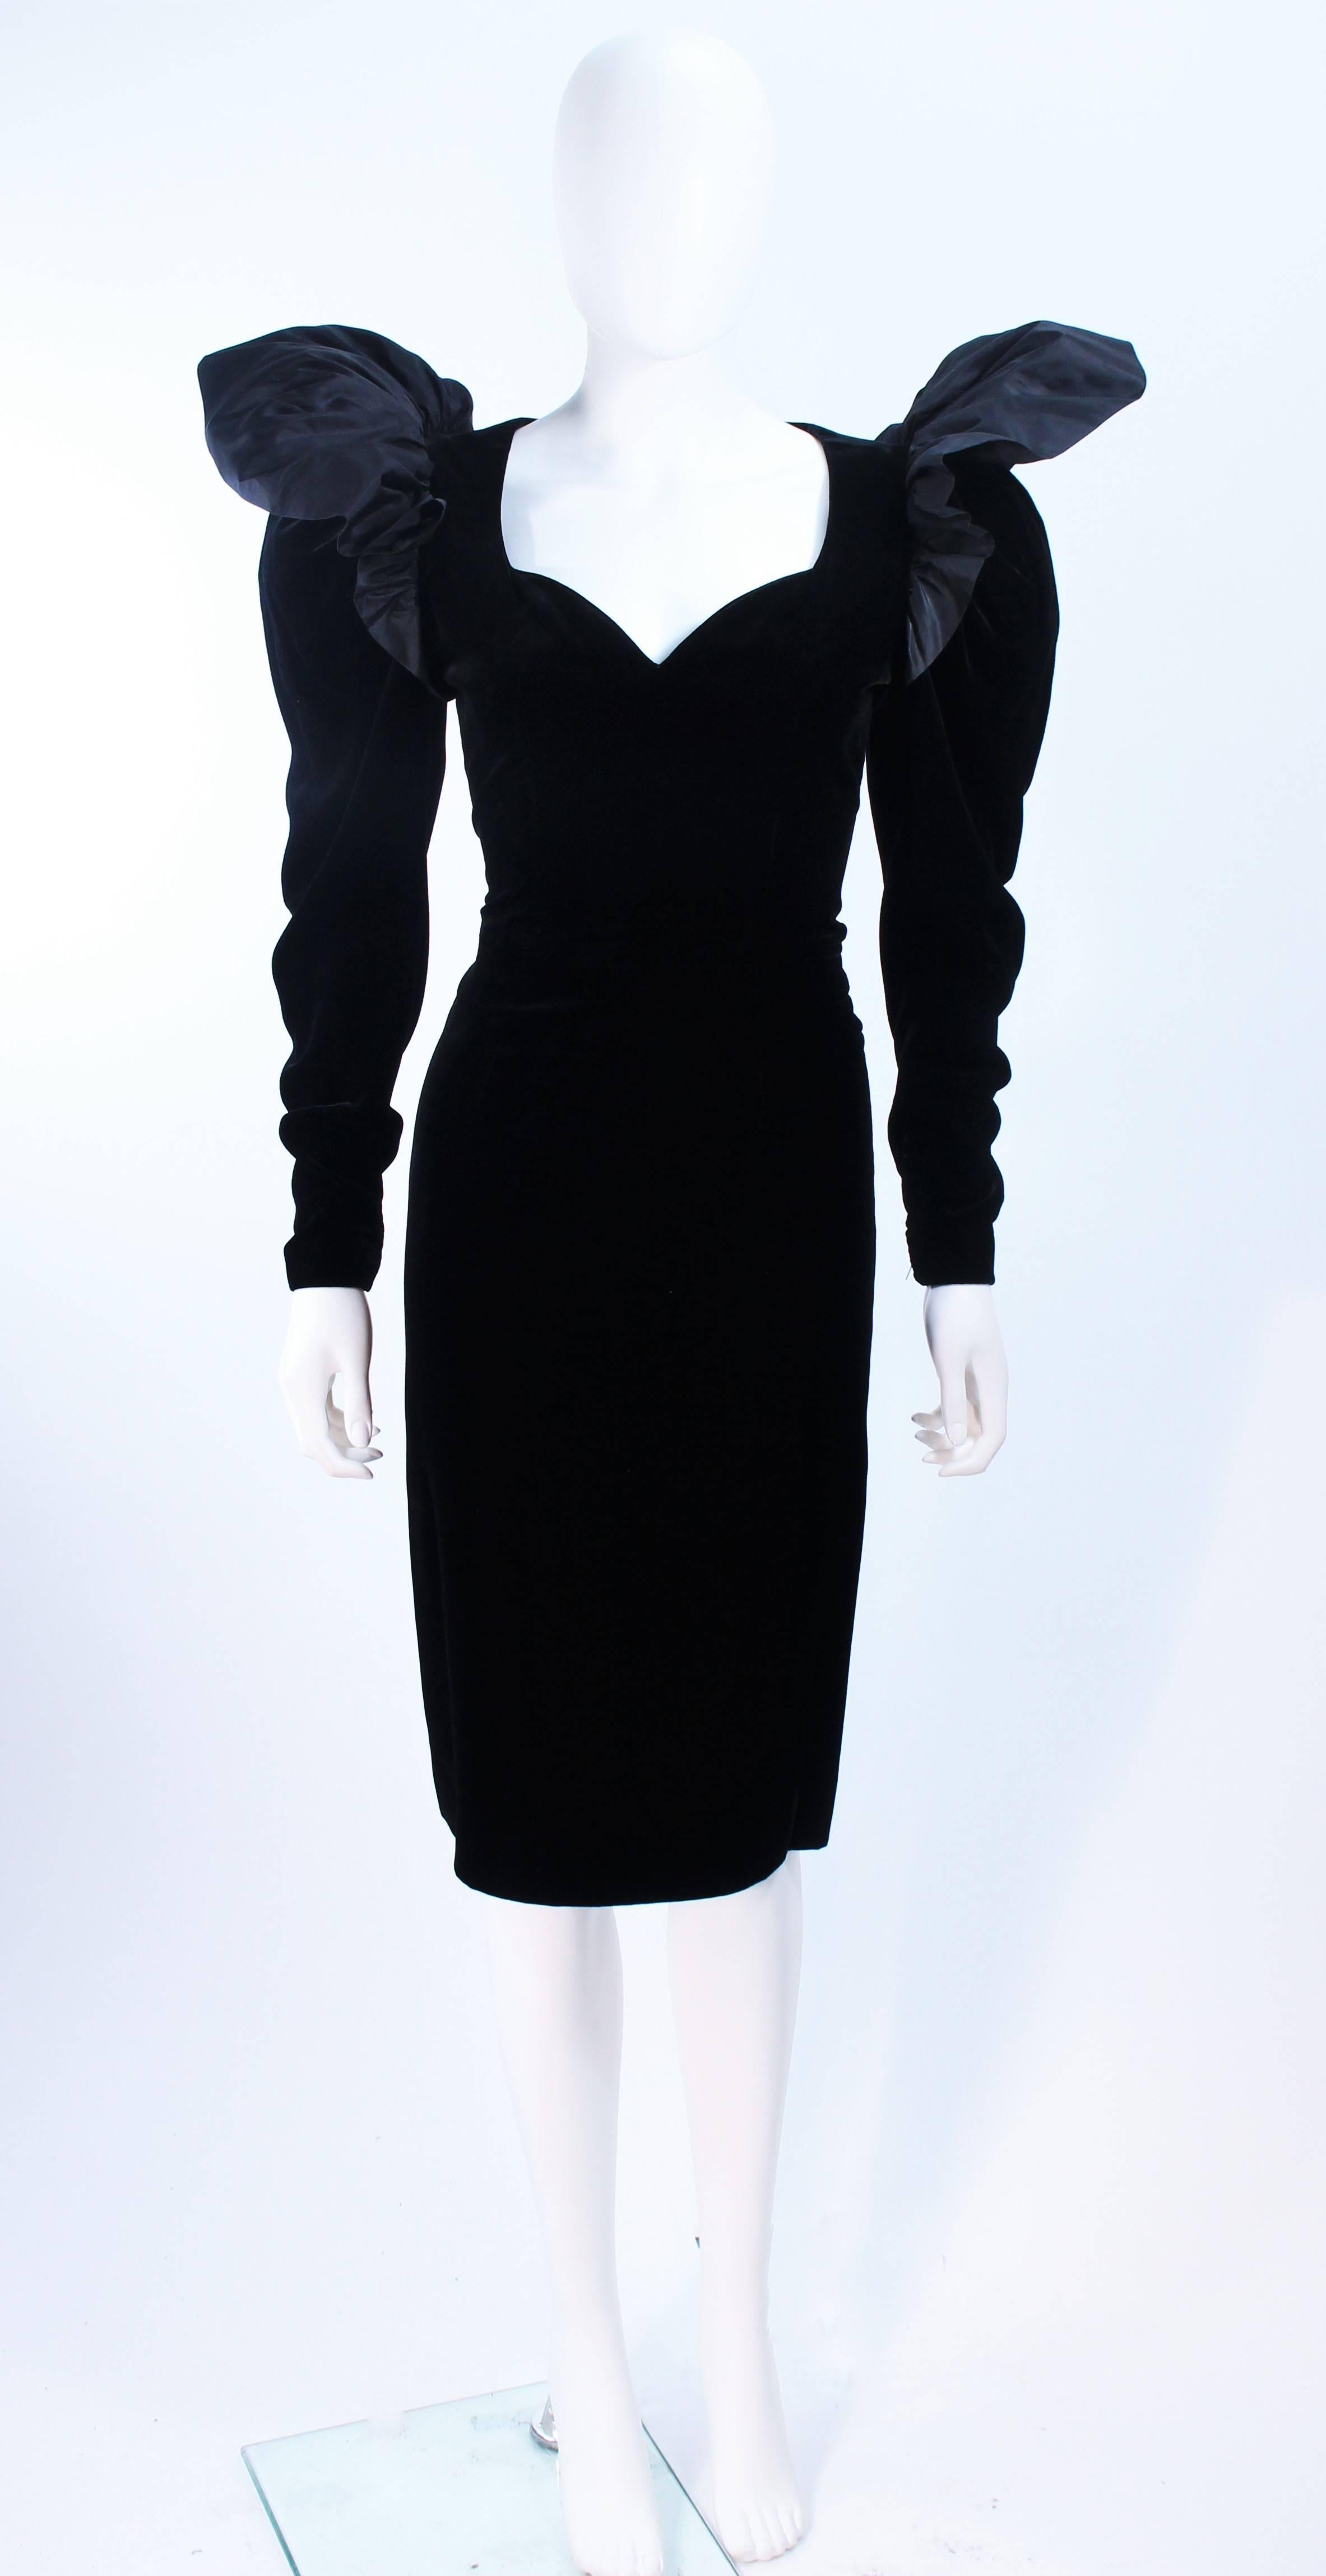 This Lanvin cocktail dress is composed of a black velvet with taffeta shoulder accents. Features a sleek and classic pencil style with a center back zipper closure. In excellent vintage condition.

**Please cross-reference measurements for